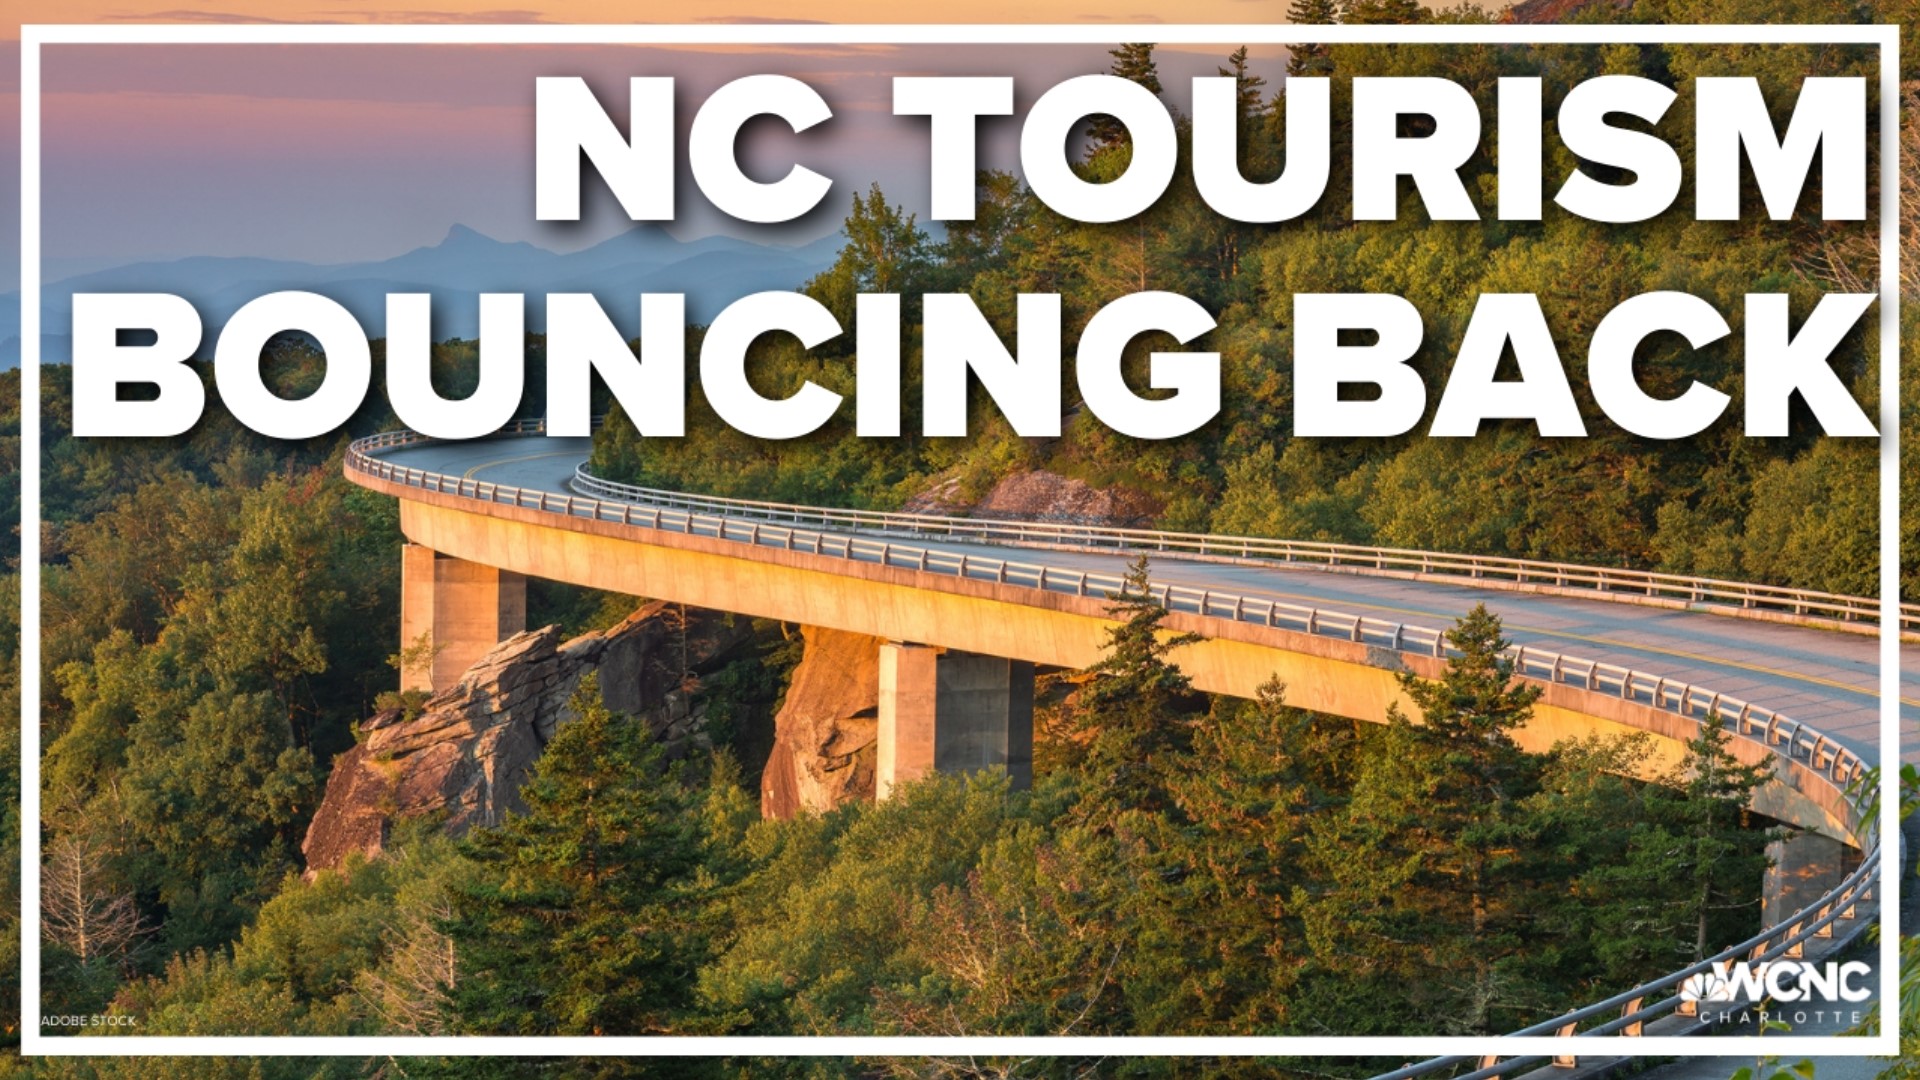 According to numbers released from Visit North Carolina, total visitor spending in 2021 reached nearly $29 billion.